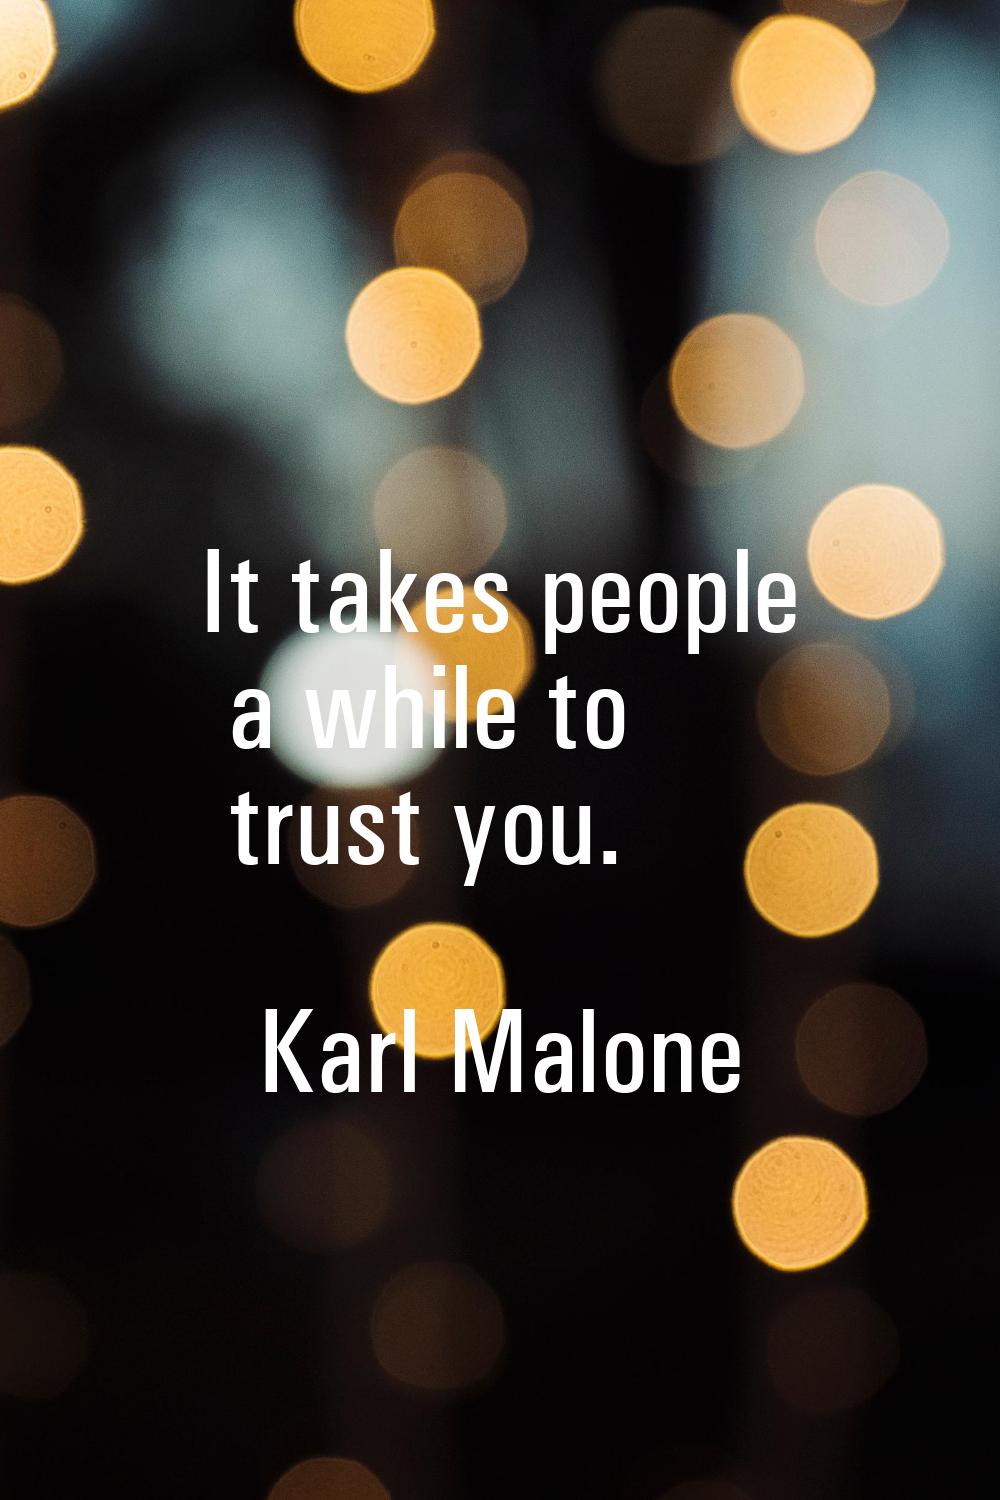 It takes people a while to trust you.